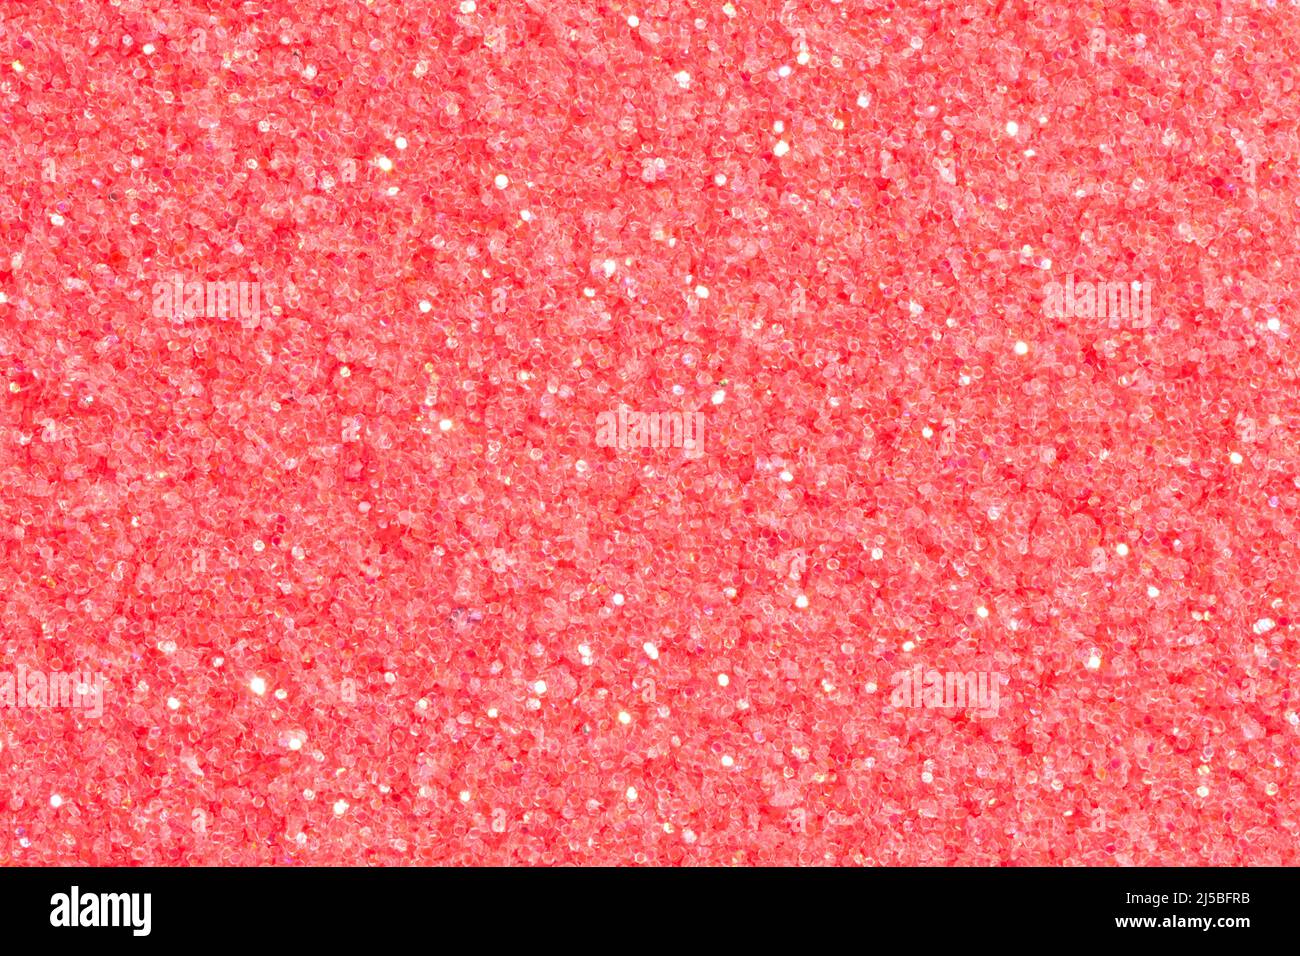 Saturated rose background with glitter for art work. Stock Photo